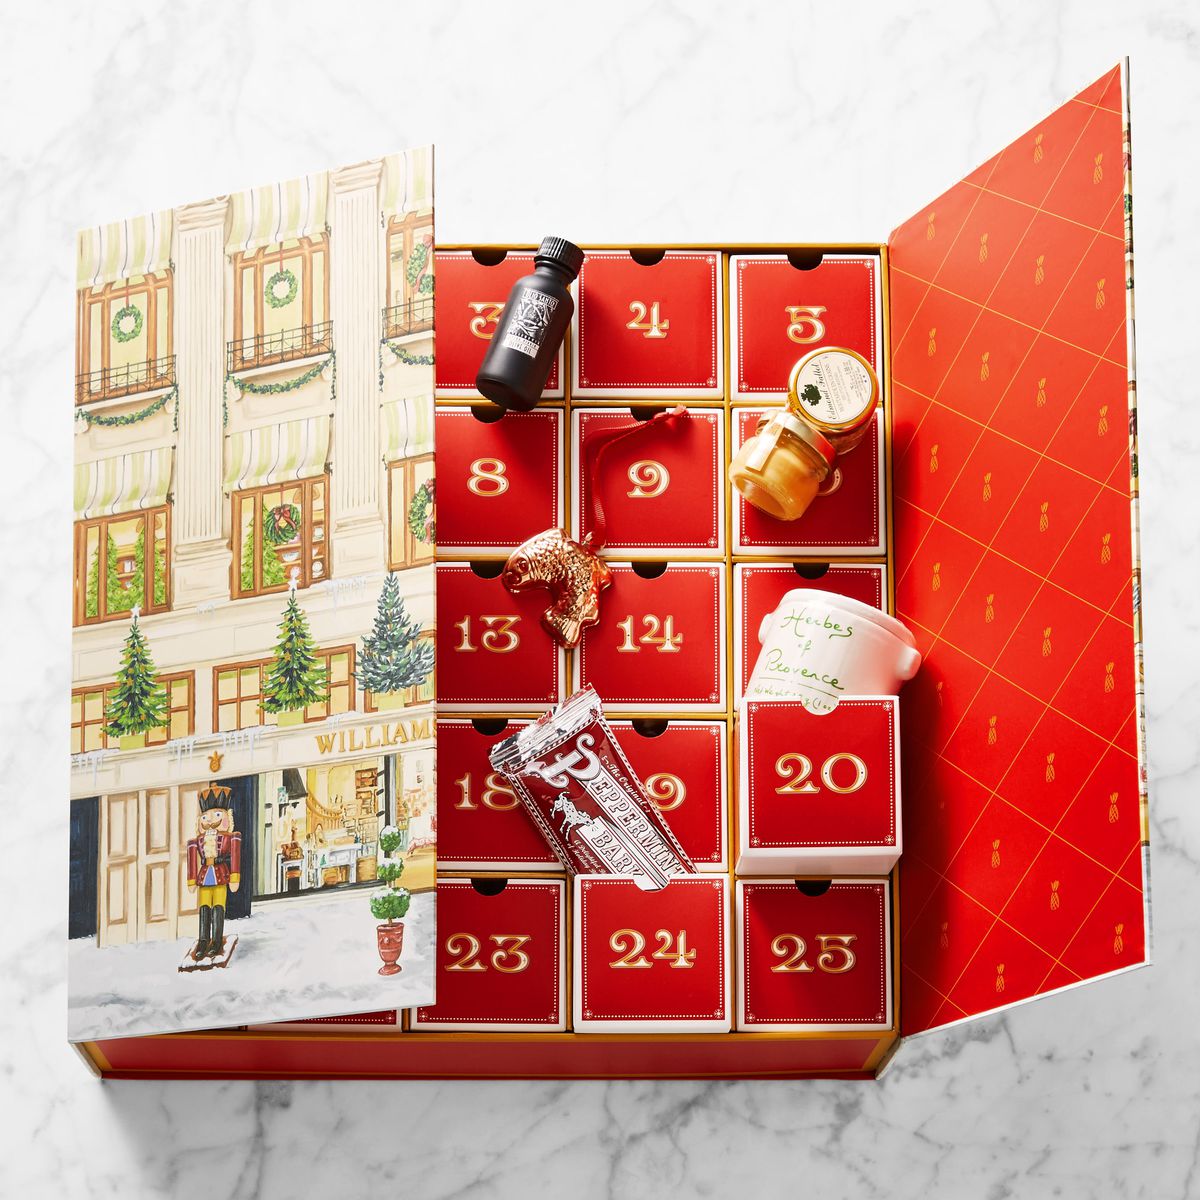 An advent calendar with open drawers